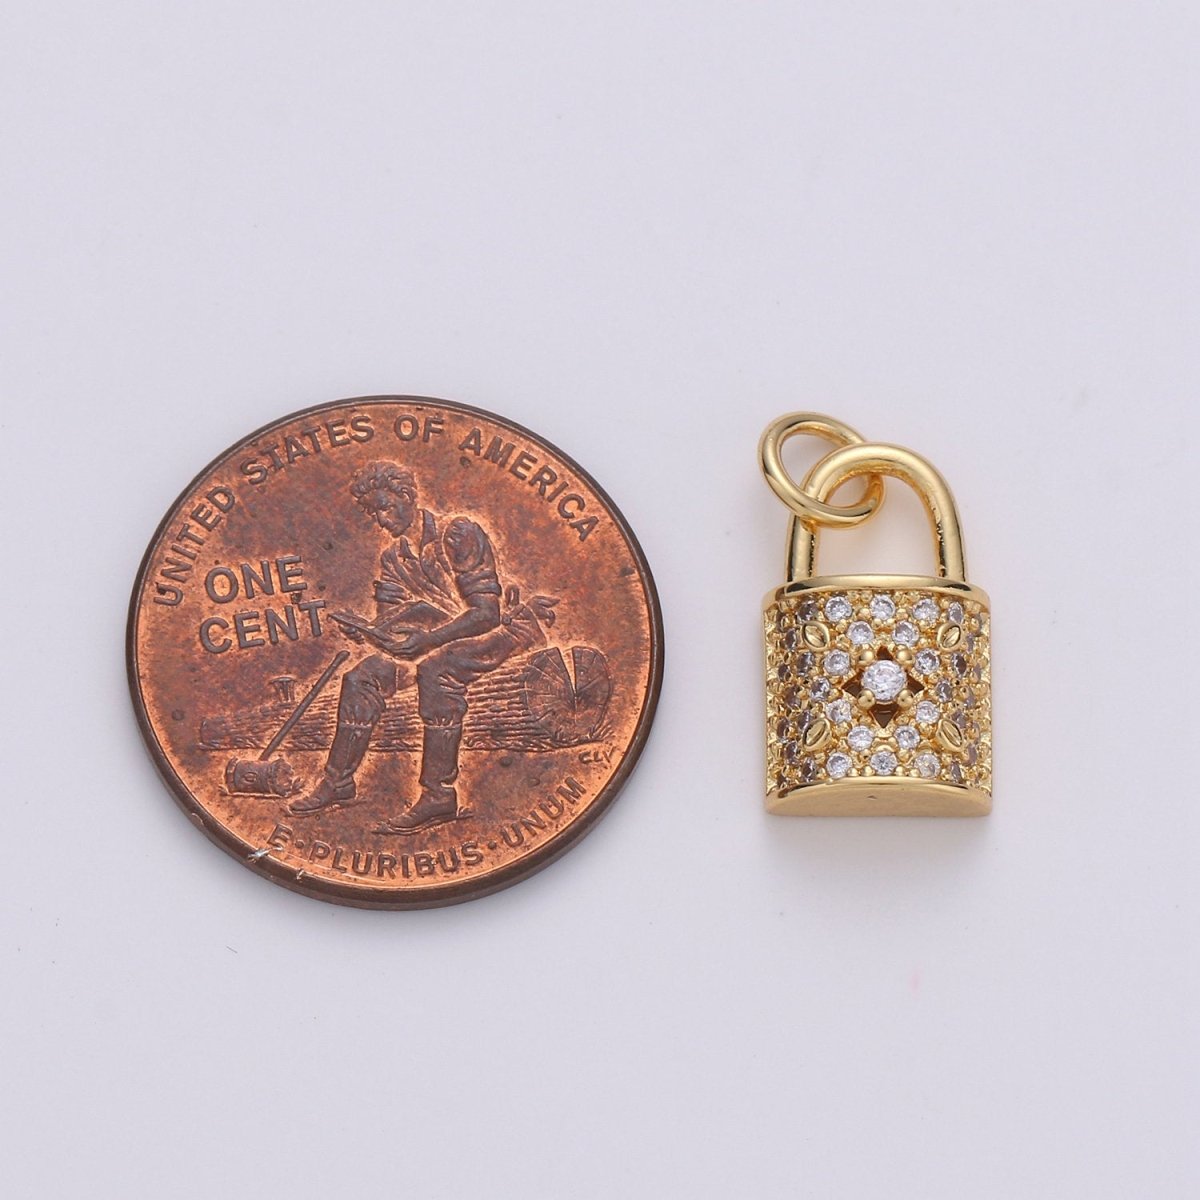 Dainty Gold Micro Pave Lock charm for Jewelry making, Minimalist Padlock charm for Bracelet Necklace Earring Component Silver Padlock Charm, D-061 D-062 - DLUXCA